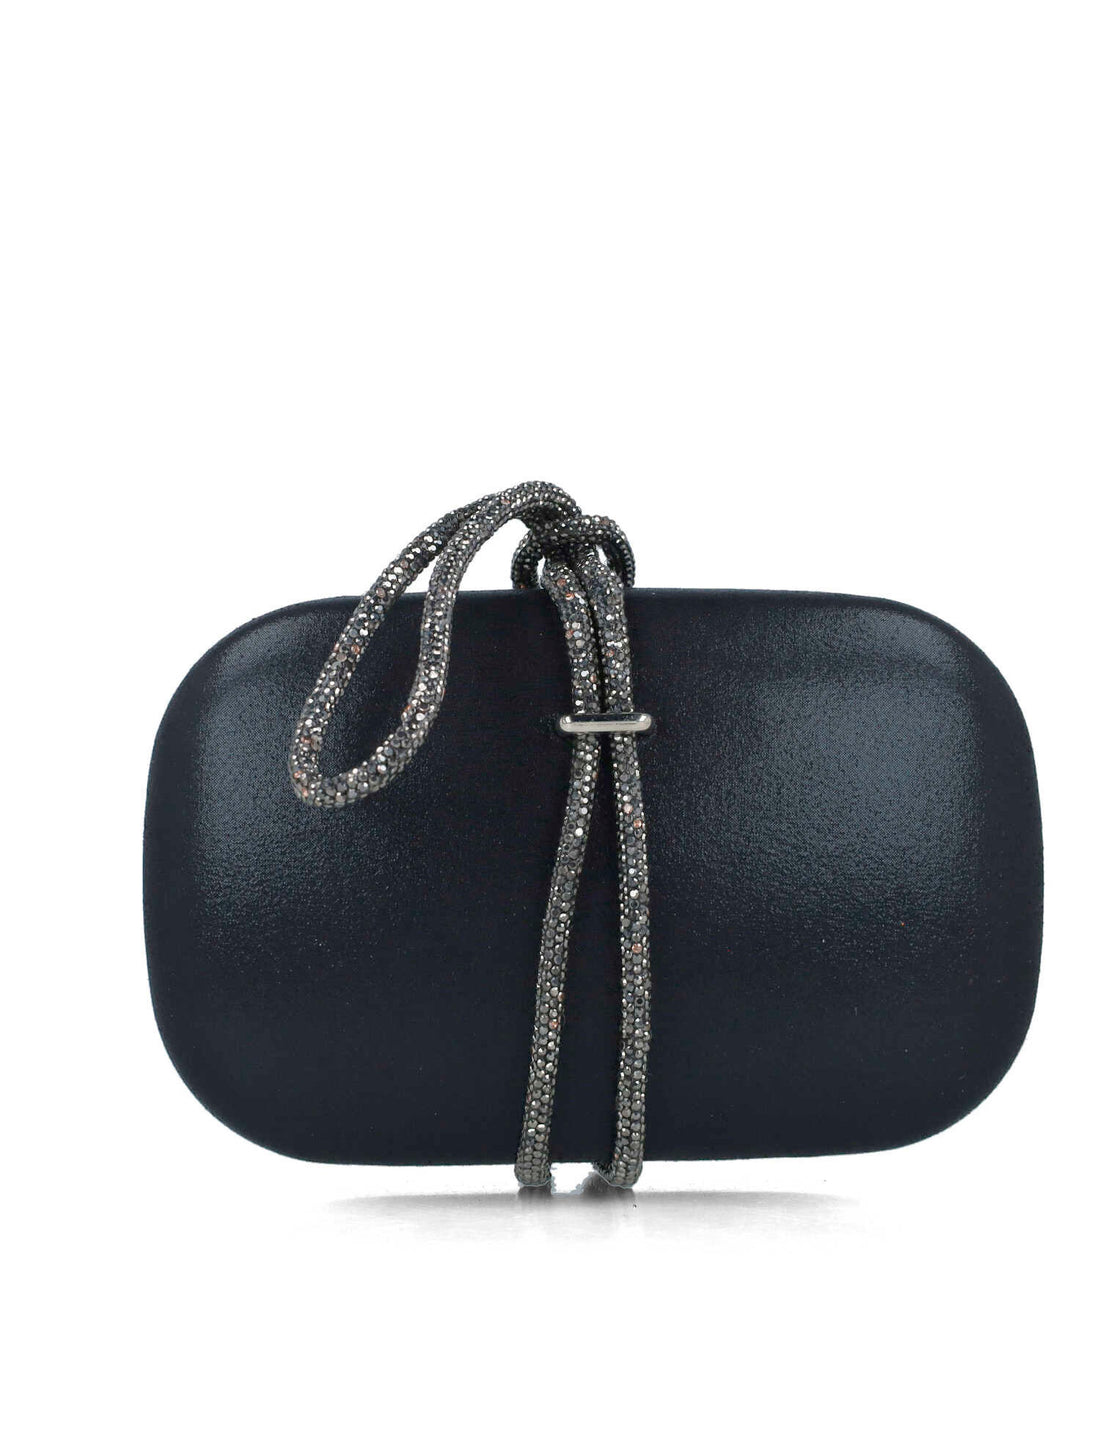 Black Clutch With Embellished Hand Strap_85499_01_01